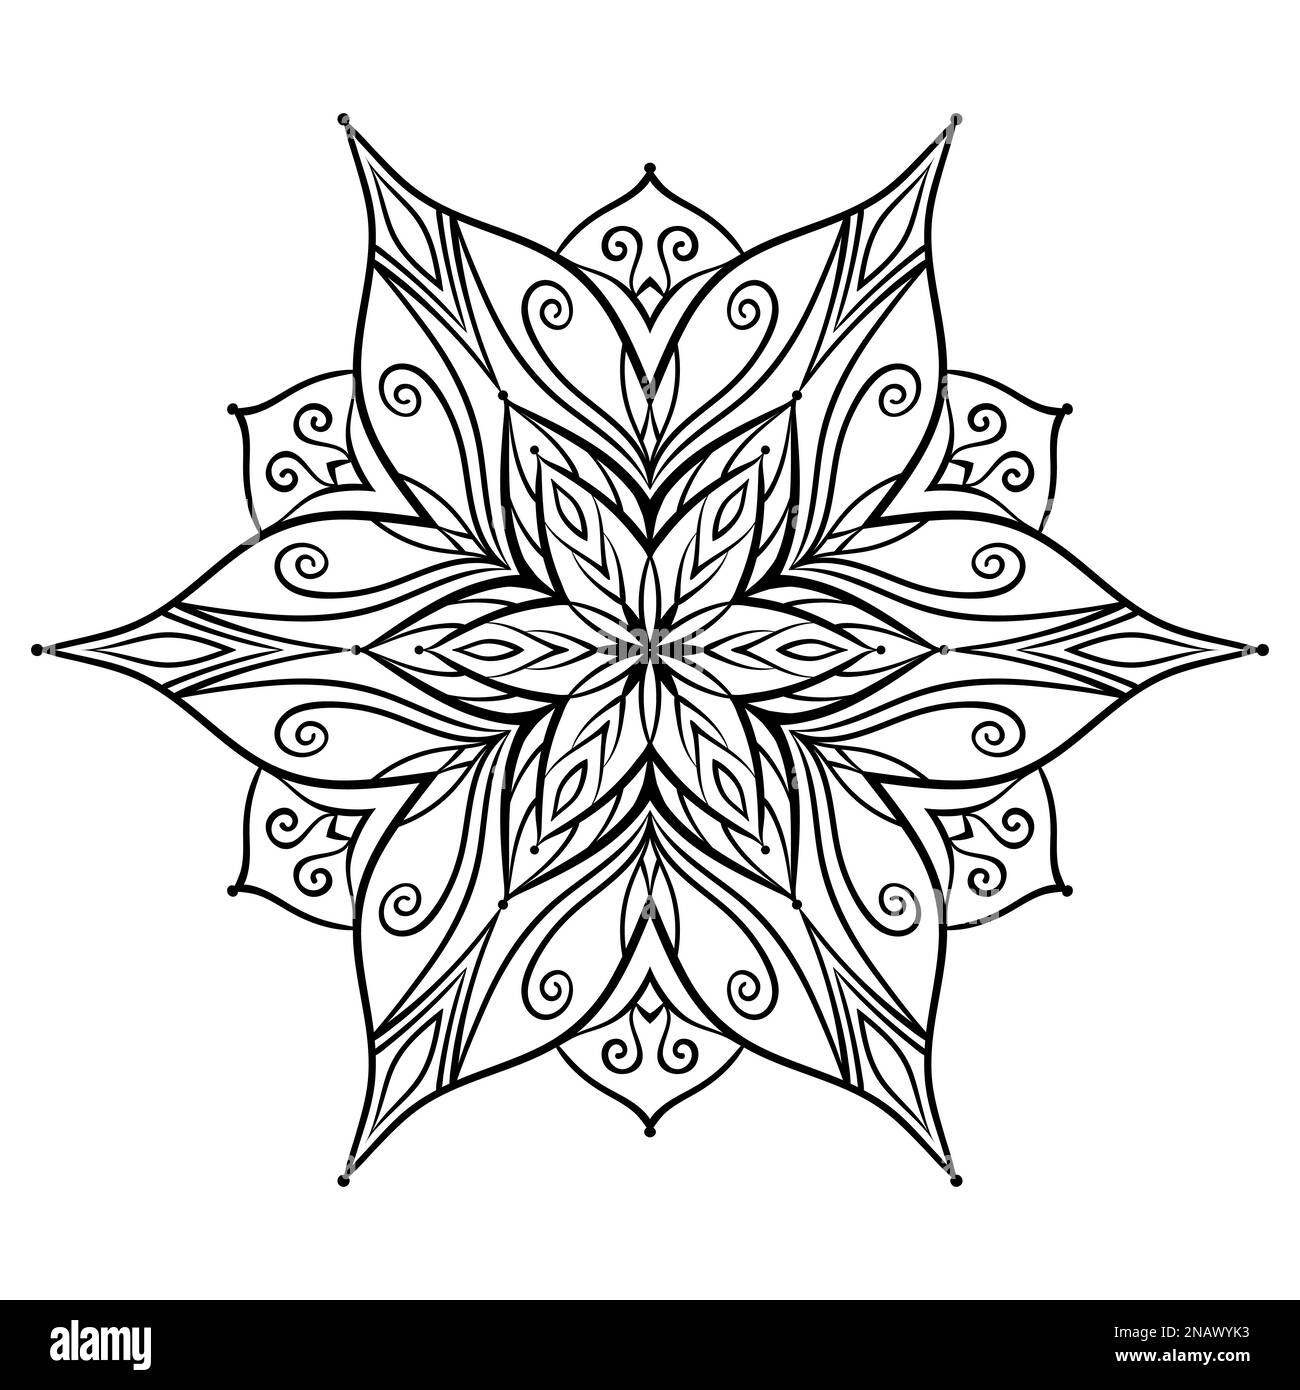 Flower mandala coloring page simple symmetric floral shape for mindful coloring stock vector image art